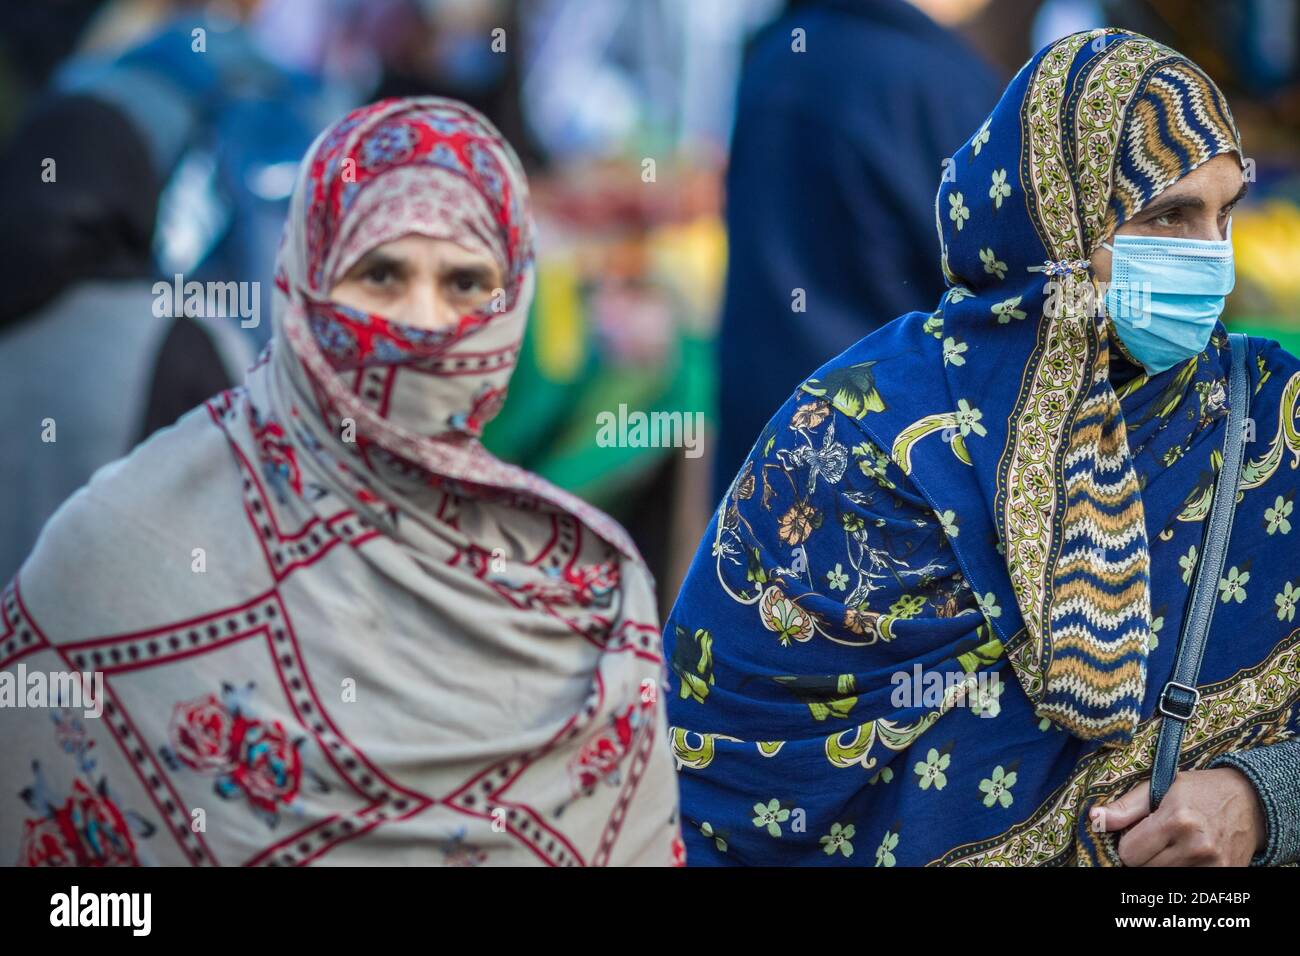 London, UK - 3 November, 2020 - Asian Muslim women wearing a face mask (focus on right) and a hijab as a face covering while shopping at Walthamstow m Stock Photo